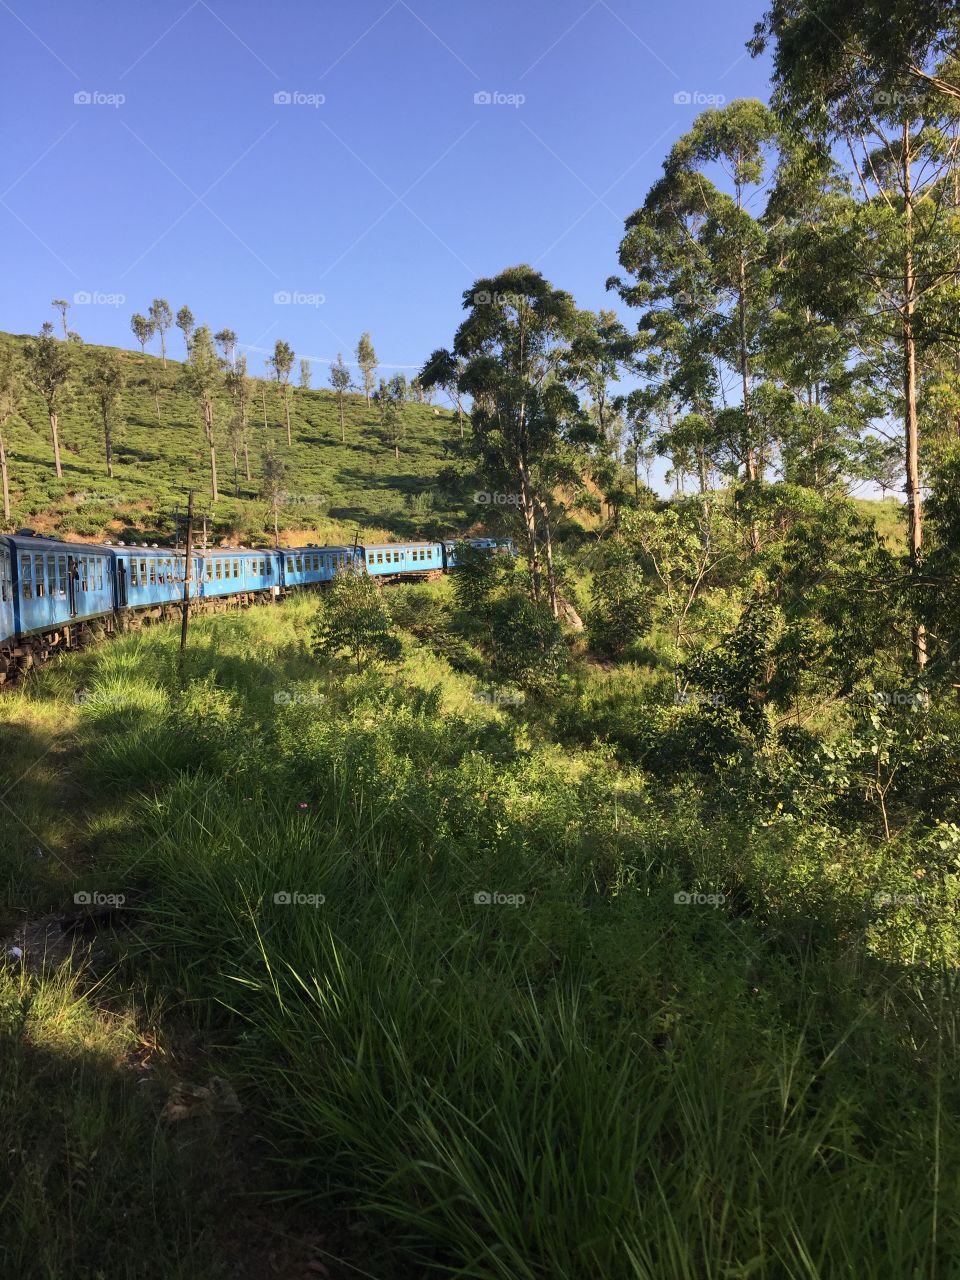 The famous Blue train! The Kandy to Ella train journey is considered one of the most beautiful in the world; passing breath taking mountain views and luscious green tea plantations. 